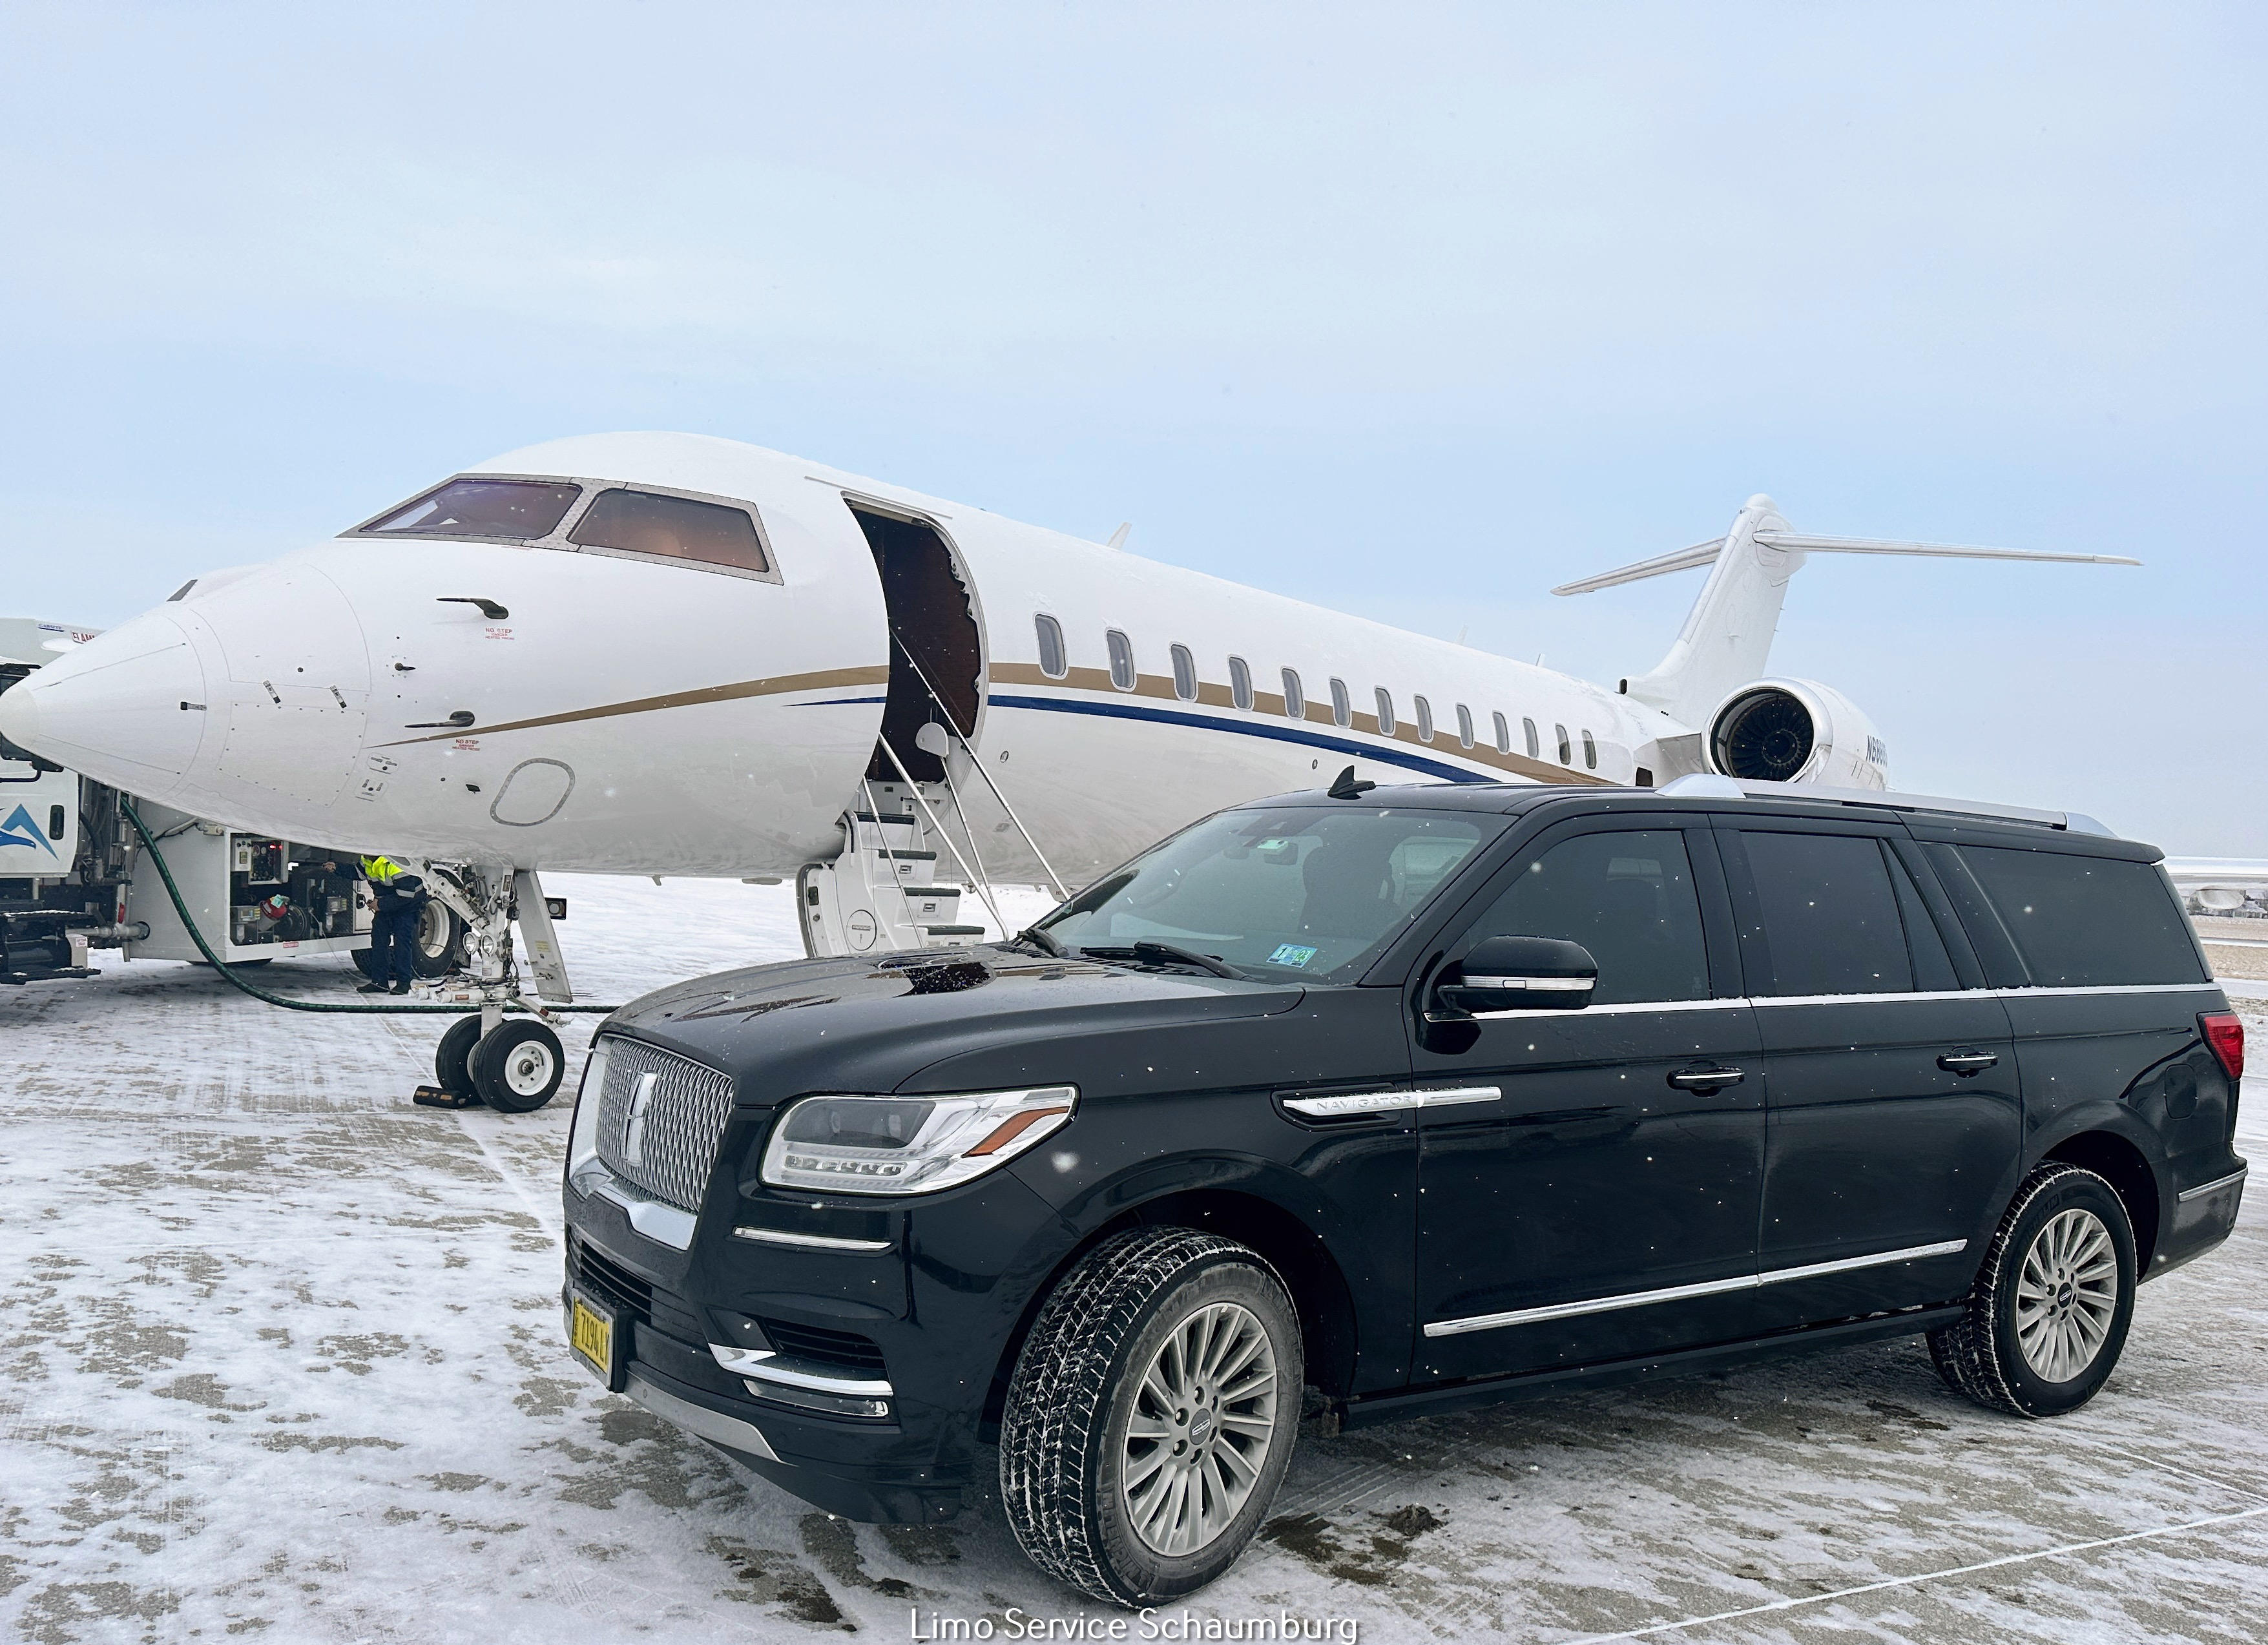 Top Rated Premium Limousine and Chauffeur services in Schaumburg, IL